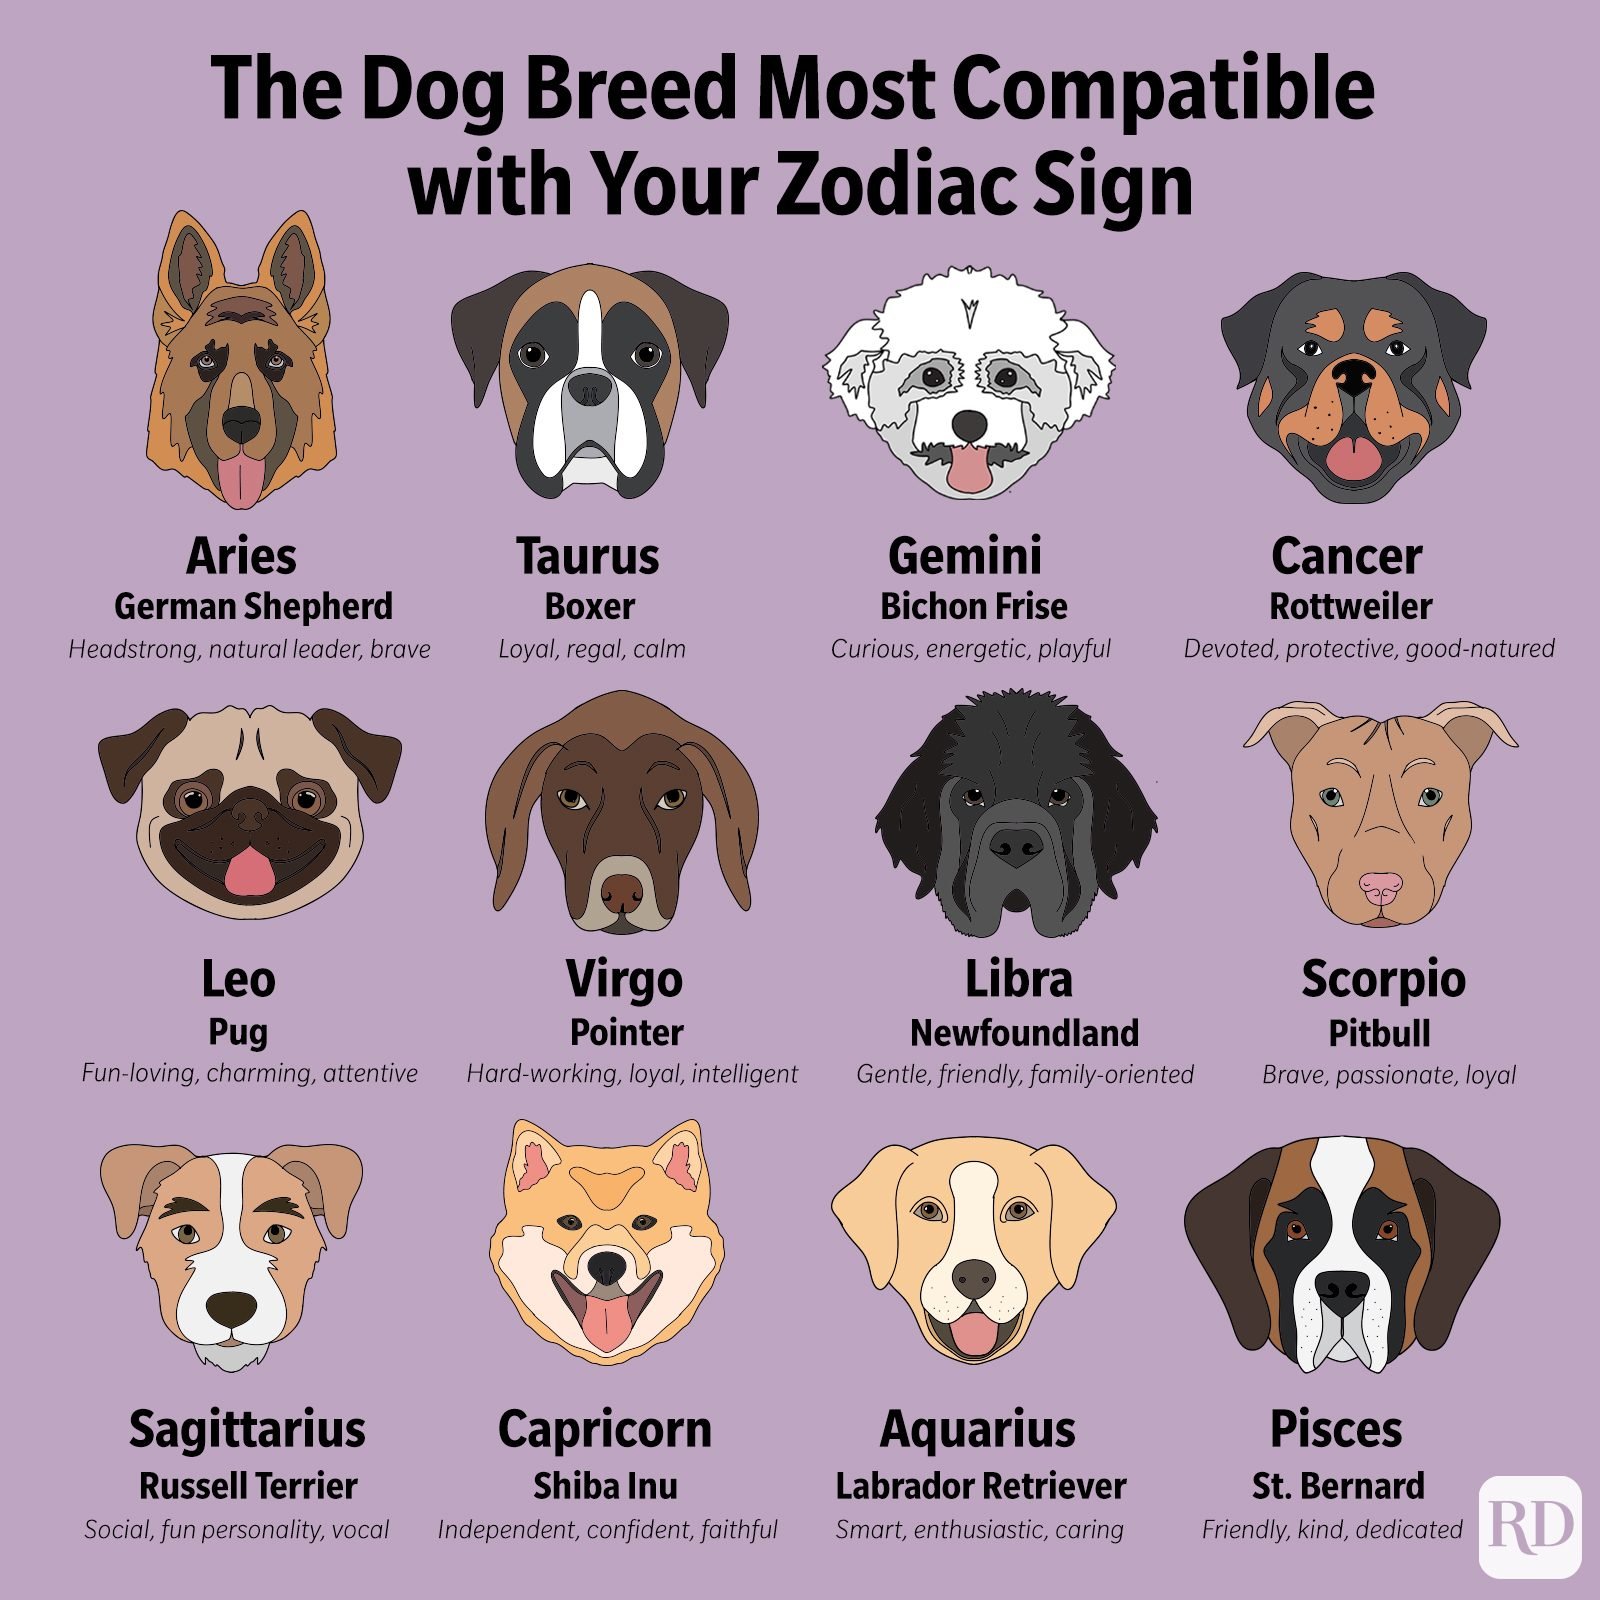 Dog breeds: Find a dog that matches your lifestyle